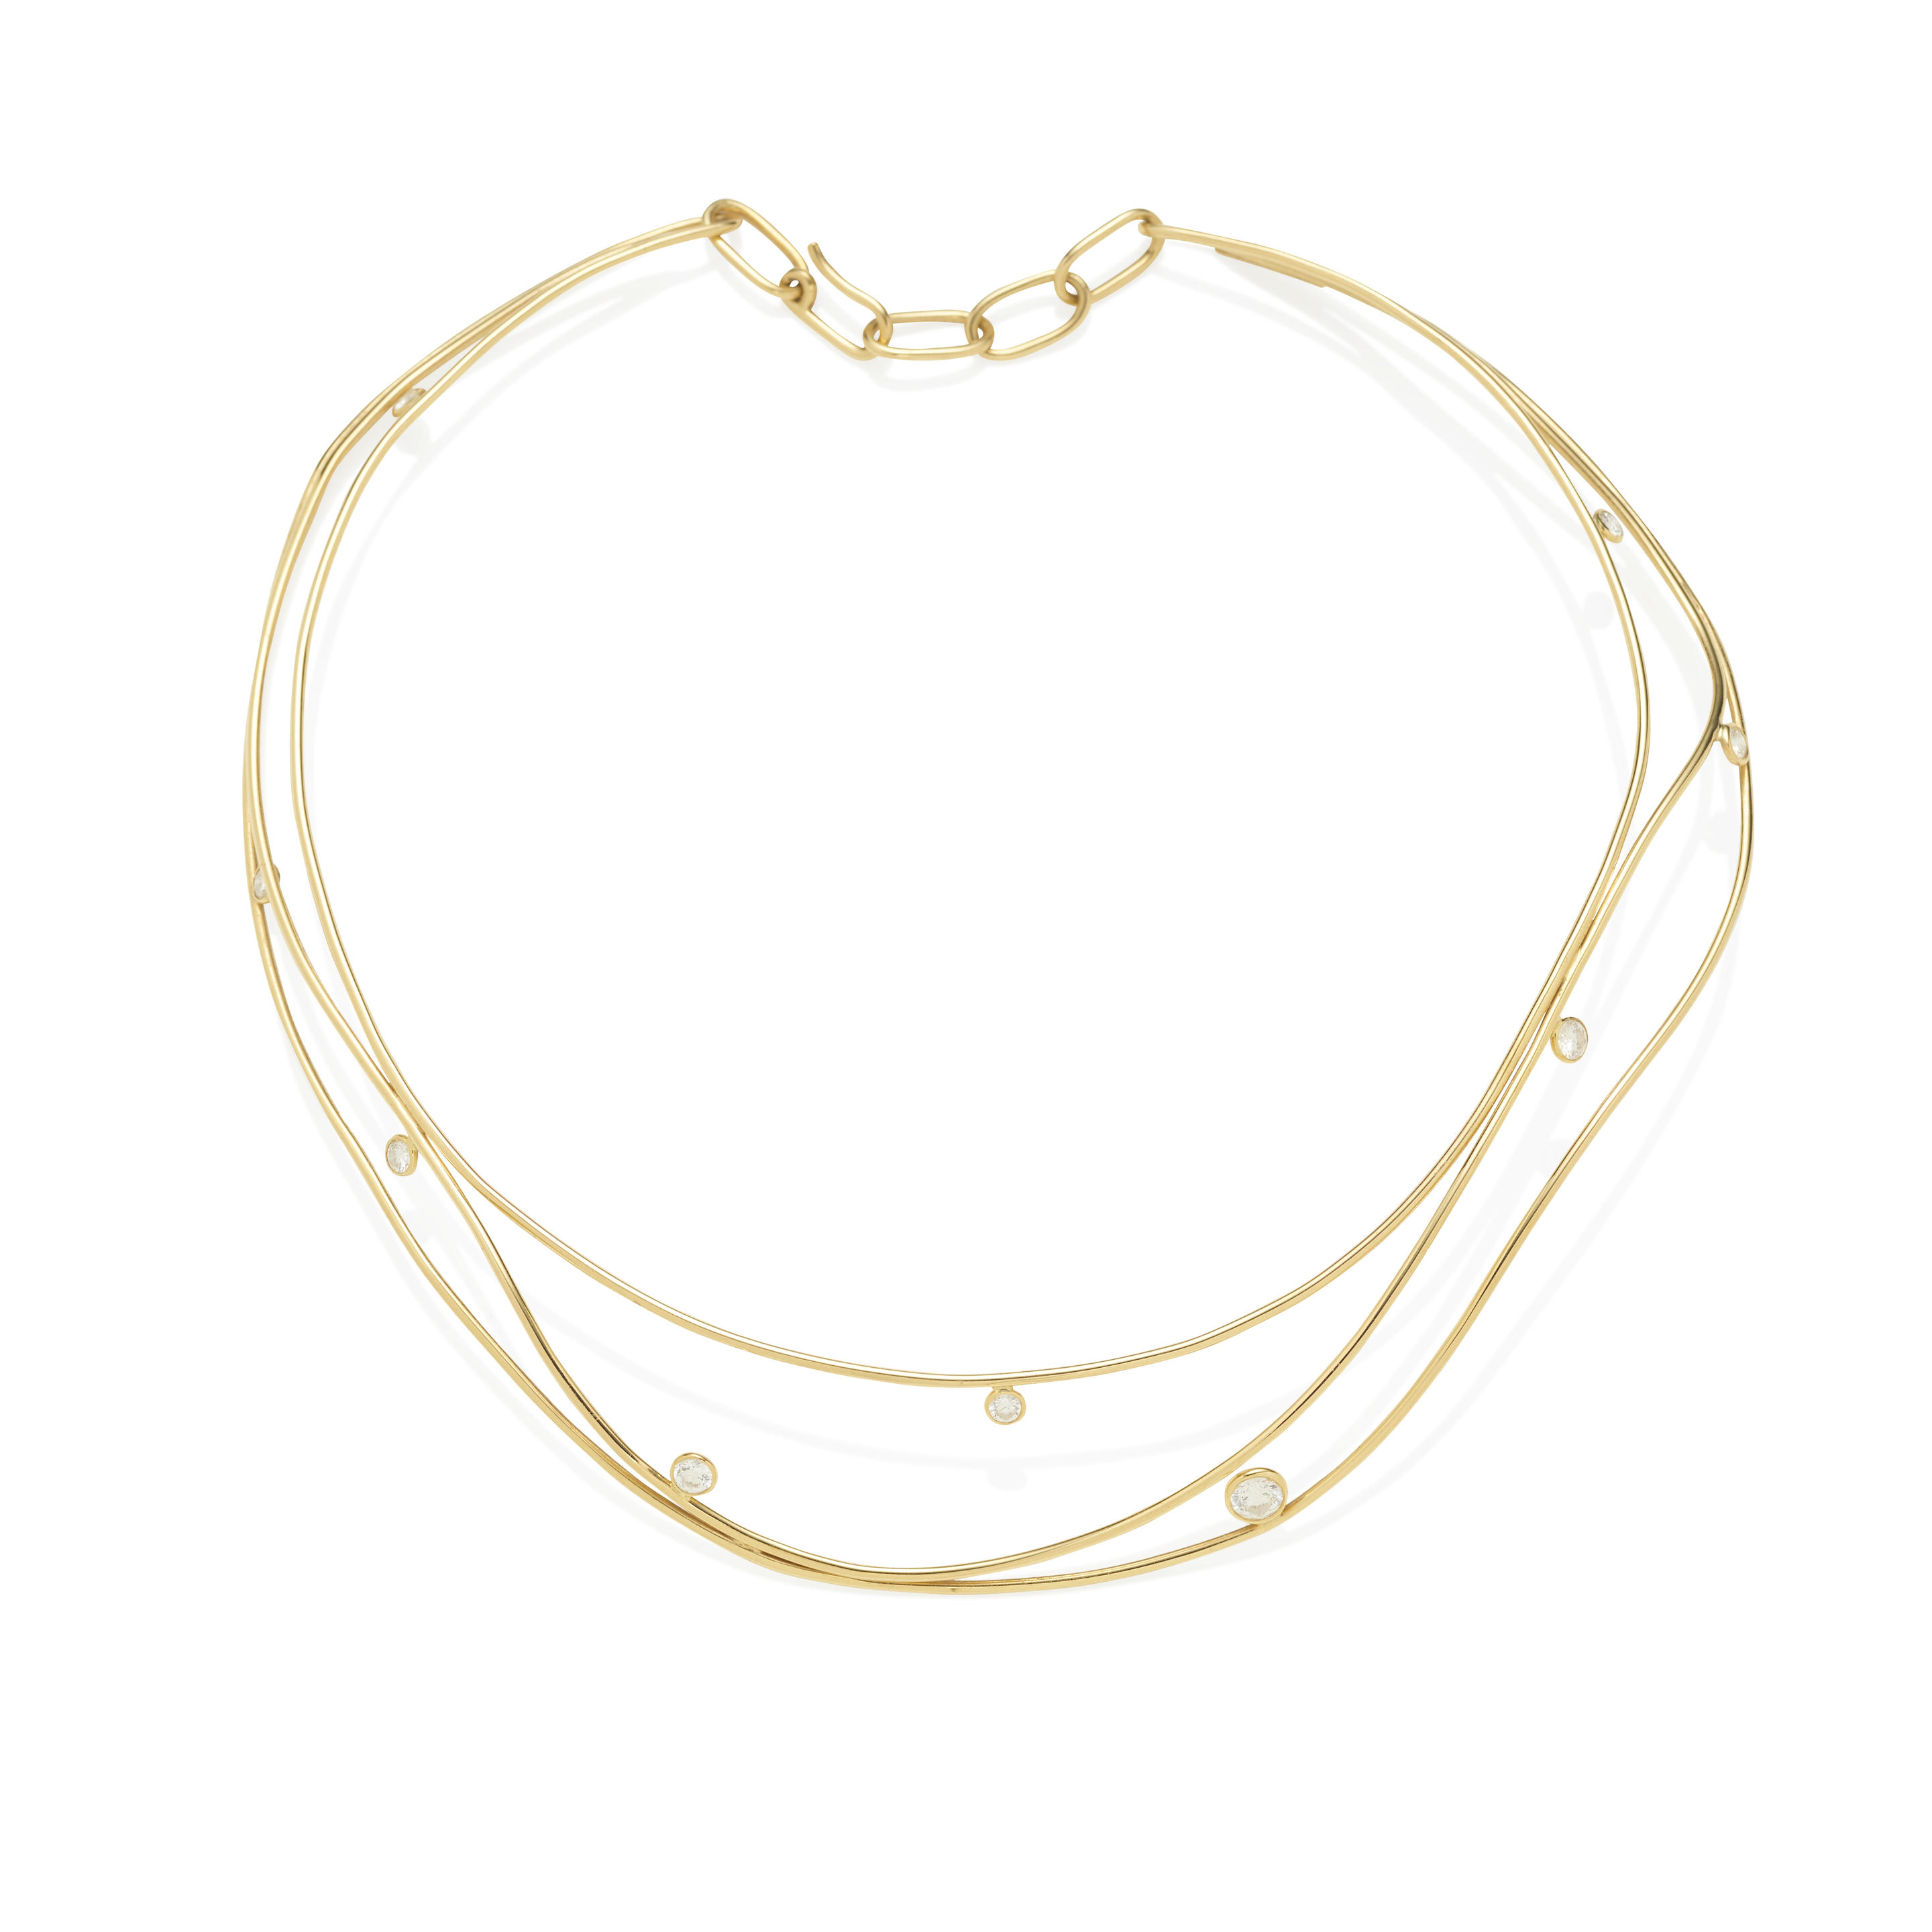 ELSA PERETTI FOR TIFFANY & CO.: AN 18K GOLD AND DIAMOND 'WAVE' NECKLACE